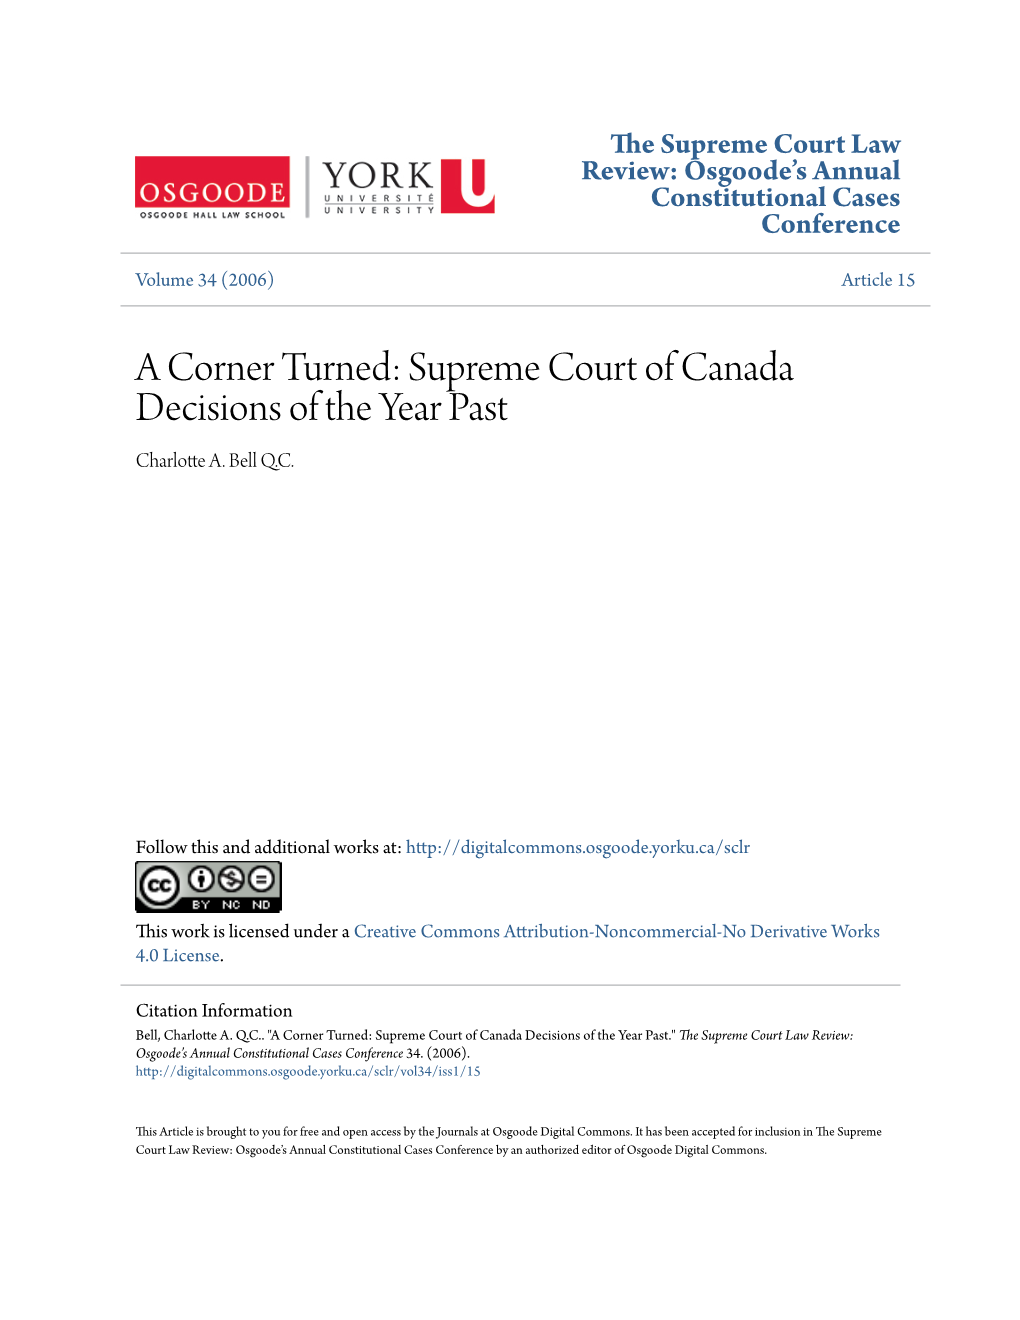 Supreme Court of Canada Decisions of the Year Past Charlotte A